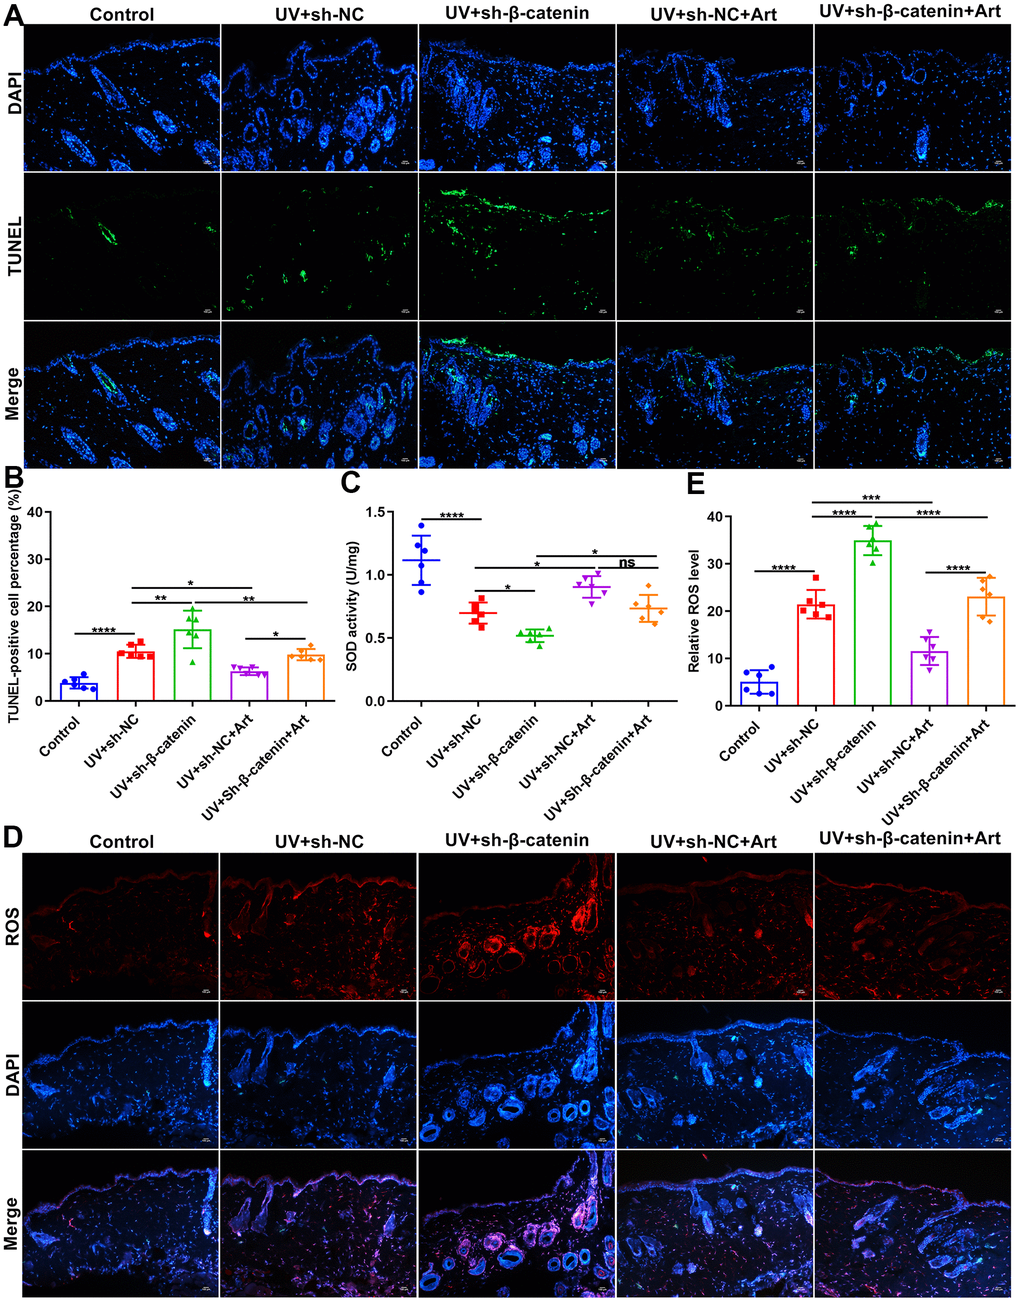 The effects of Art treatment and silencing β-catenin expression on apoptosis and ROS and SOD production in skin tissues of mice. (A, B) TUNEL staining of skin tissues for assessing cell apoptosis in control group, UV + sh-NC group, UV + sh-β-catenin group, UV + sh-NC + Art group and UV + sh-β-catenin + Art group. Scale bar: 100 μm. Magnification: 200×. (C) Detection of SOD levels in skin tissues of mice from each group. (D, E) Immunofluorescence for intracellular ROS production in skin tissues of mice from each group. Scale bar: 100 μm. Magnification: 200×. Ns: not significant; *p